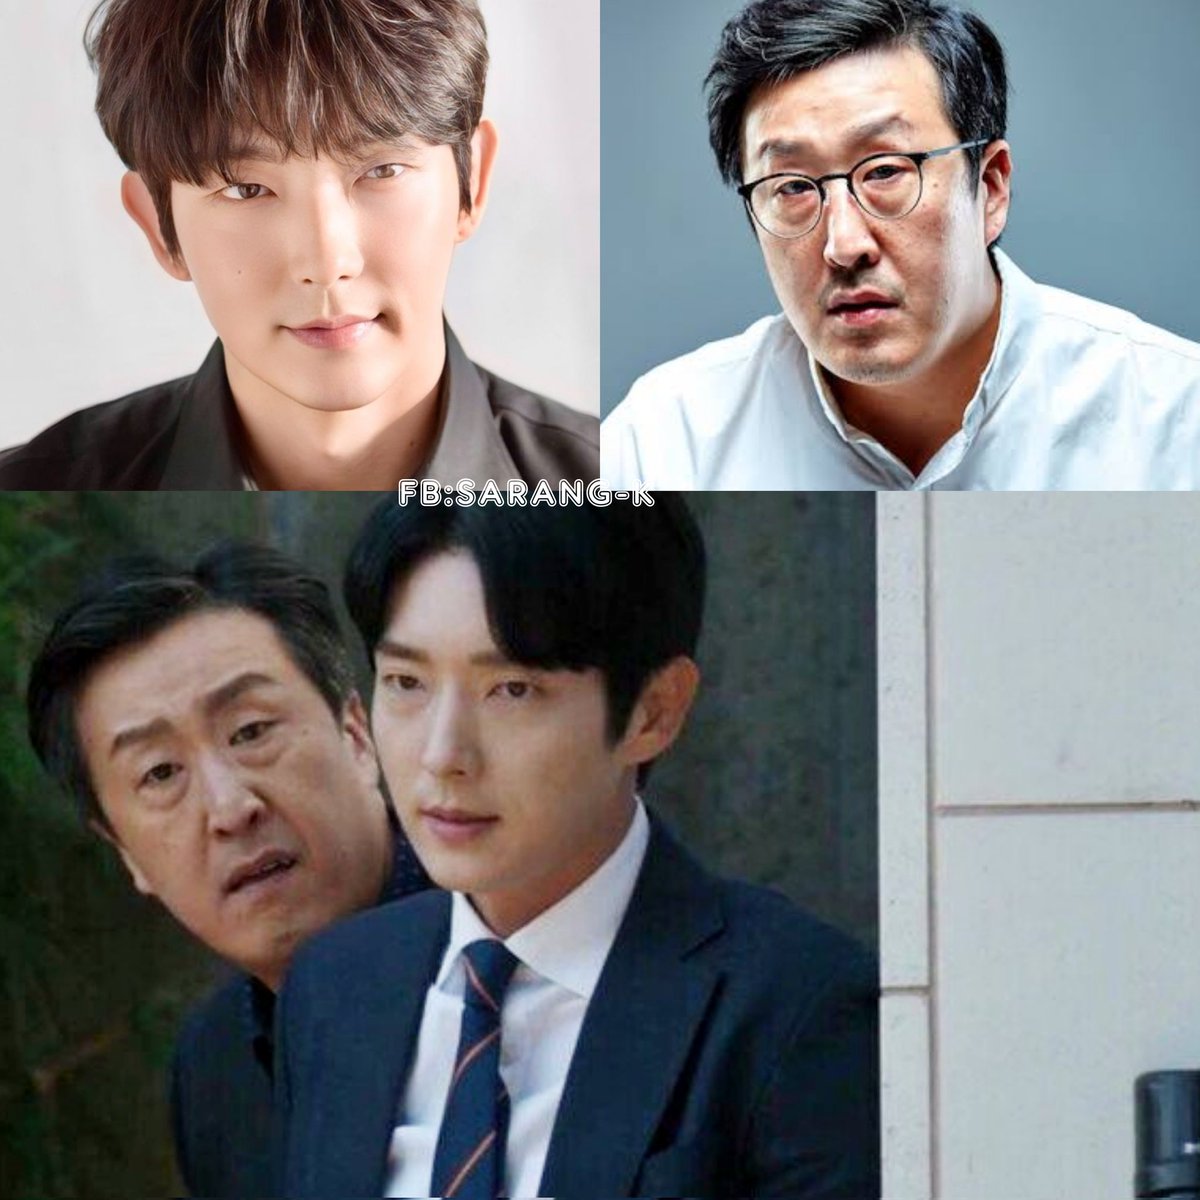 [K-TRIVIA] Done watching #AgainMyLife? Then here is a little trivia for you.#HyunBongSik and #LeeJoonGi are two years apart. Hyung Bong Sik is 37 yrs old while Lee Joon Gi is 40 yrs old. So basically #LeeJoonGi is the older one like WTF???!!!! 😱😱😱